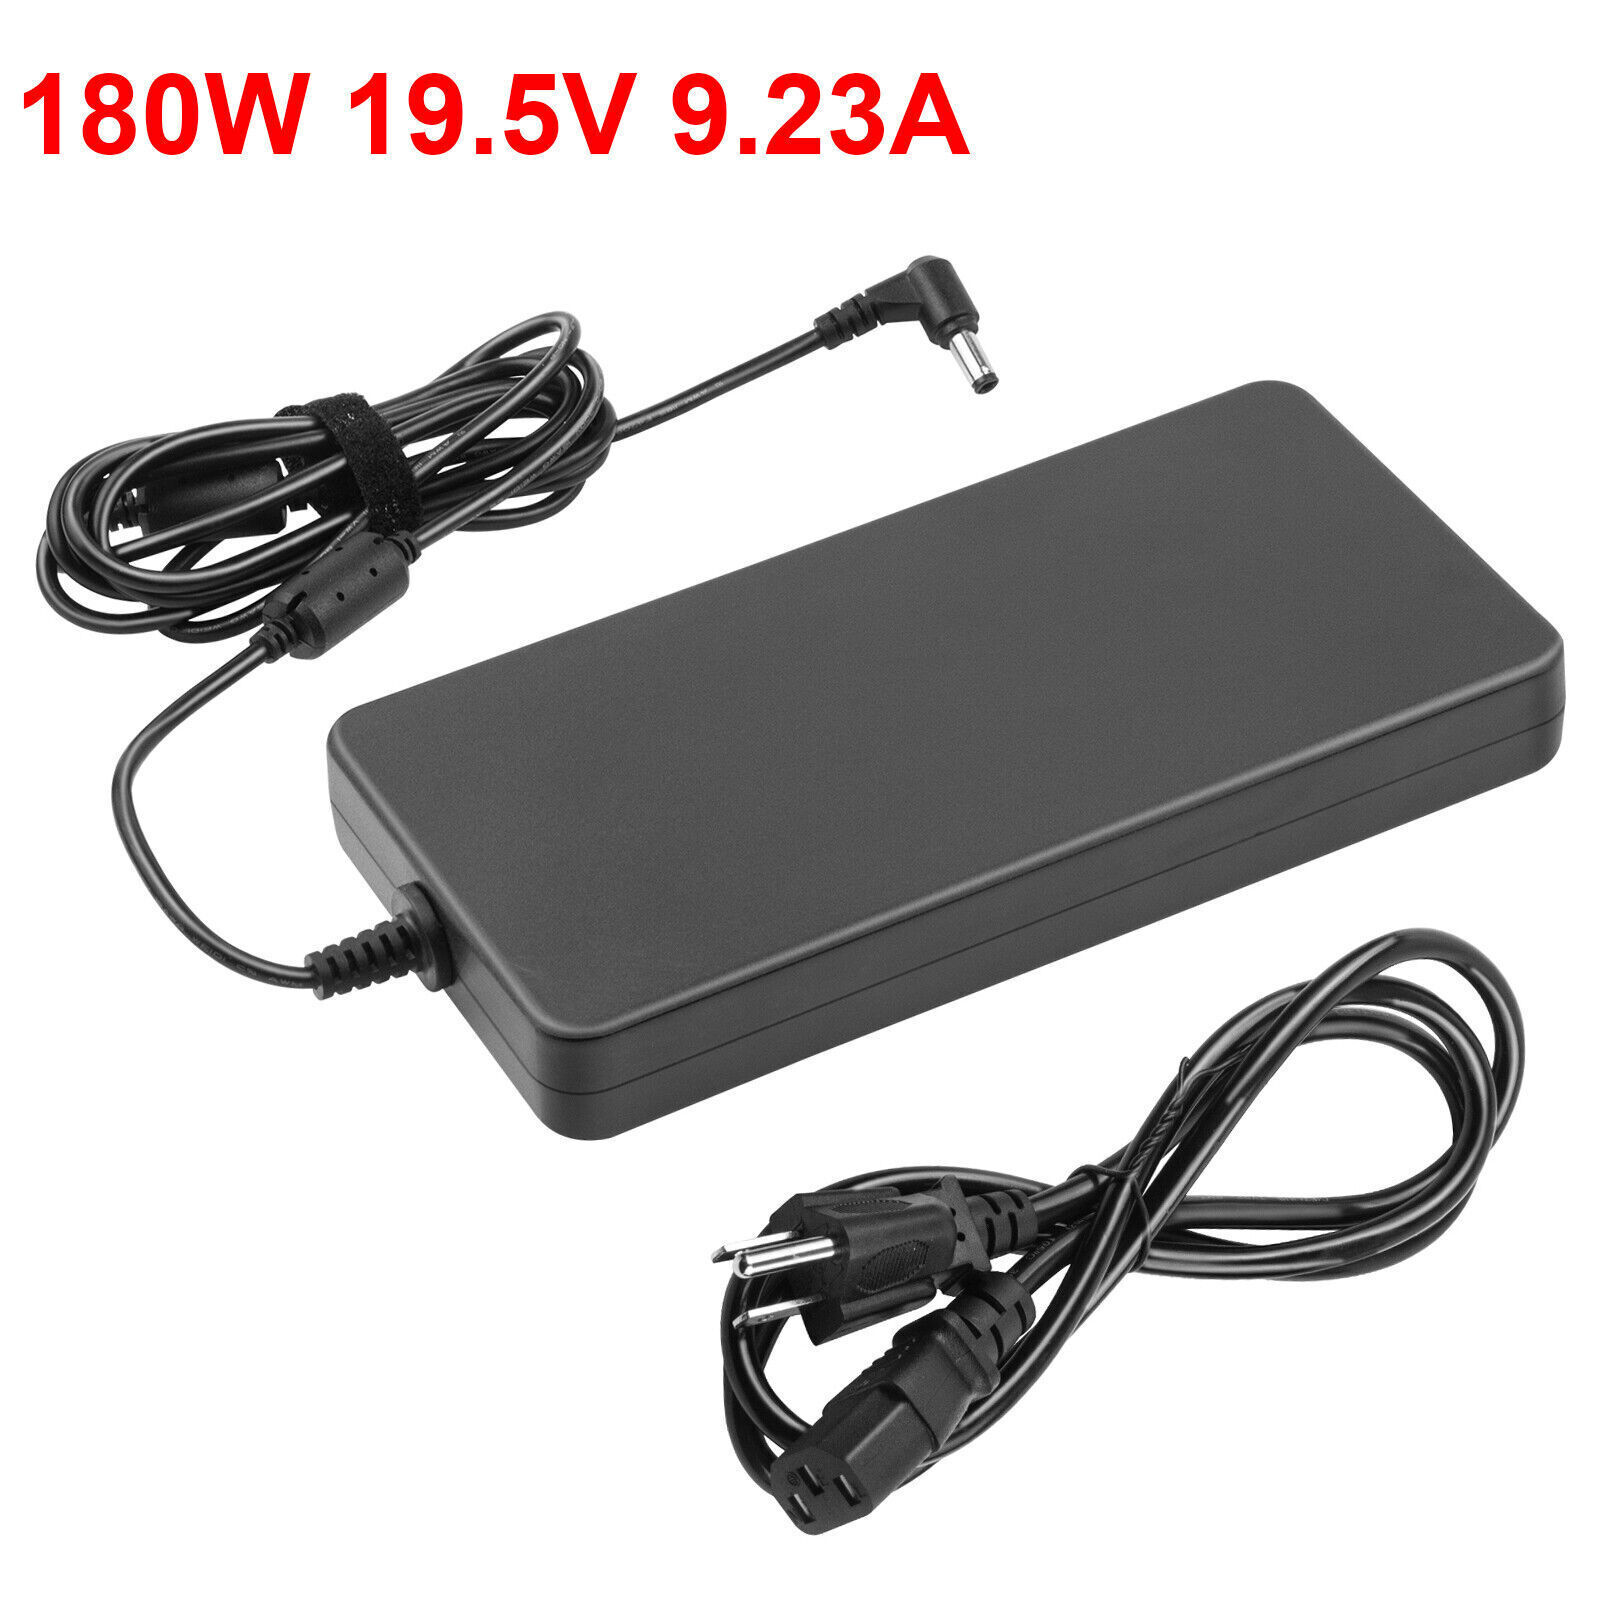 120W/180W AC Power Adapter Laptop Charger For MSI ASUS ROG ADP-180MB K 5.5*2.5MM